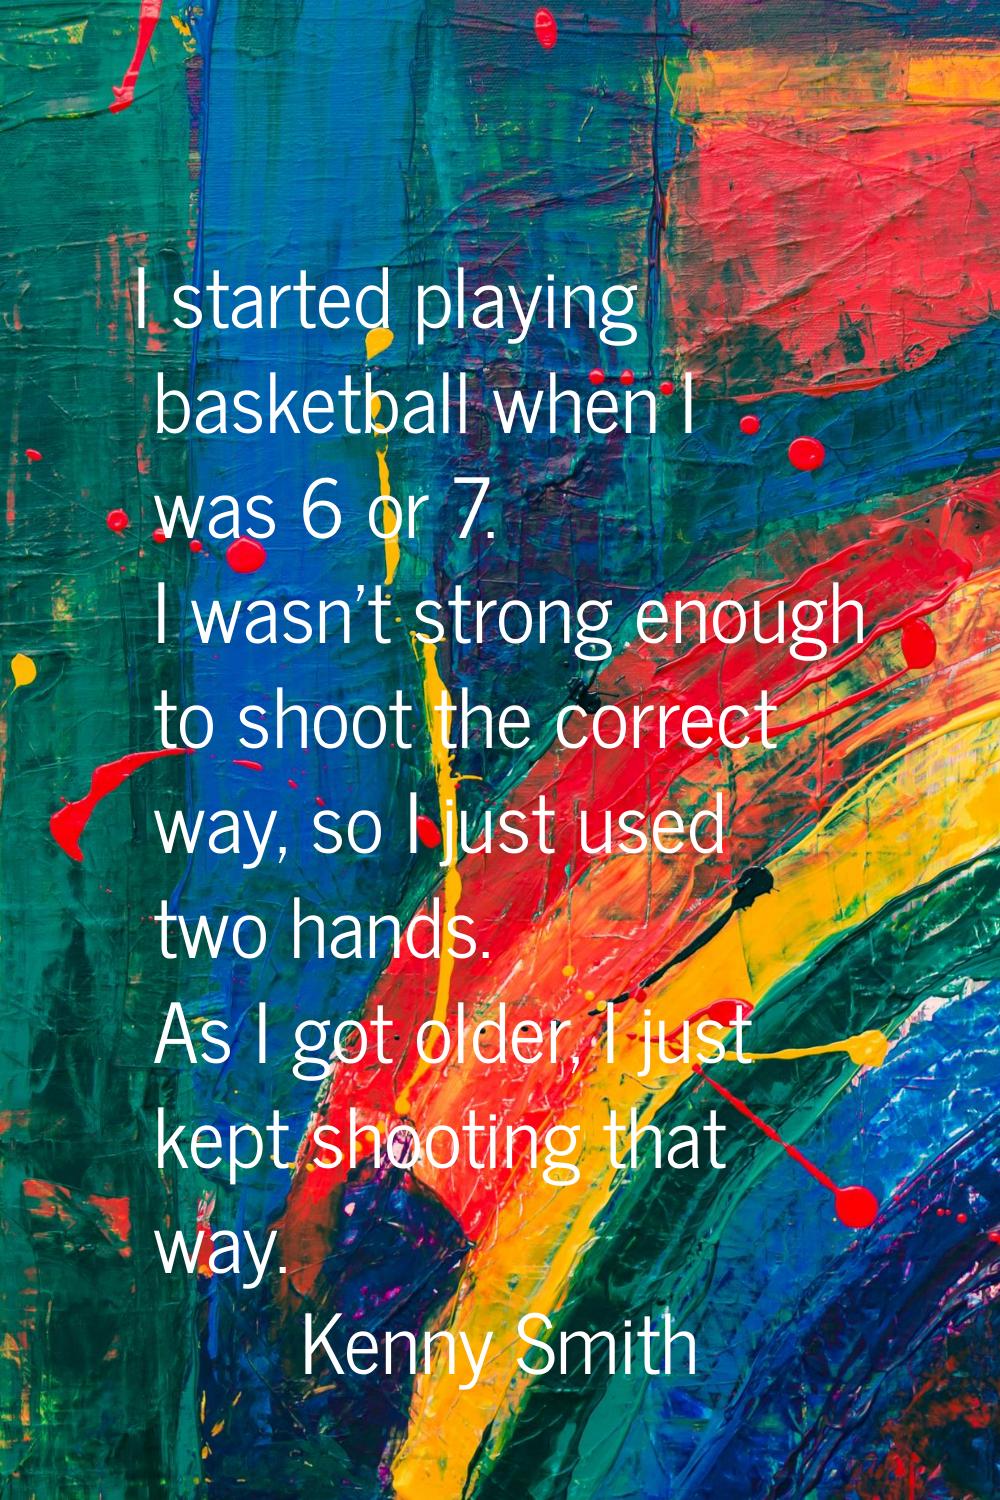 I started playing basketball when I was 6 or 7. I wasn't strong enough to shoot the correct way, so